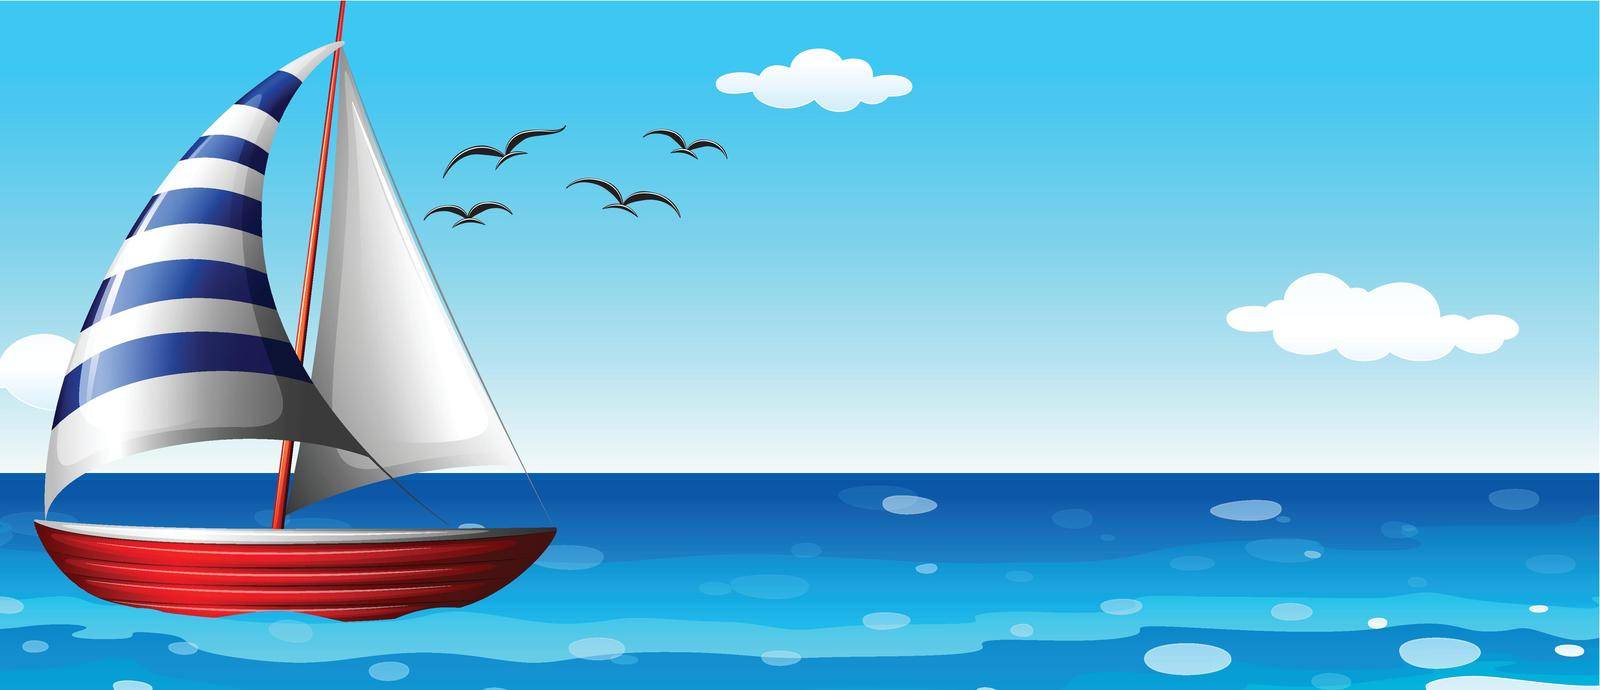 Illustration of a ship in the ocean